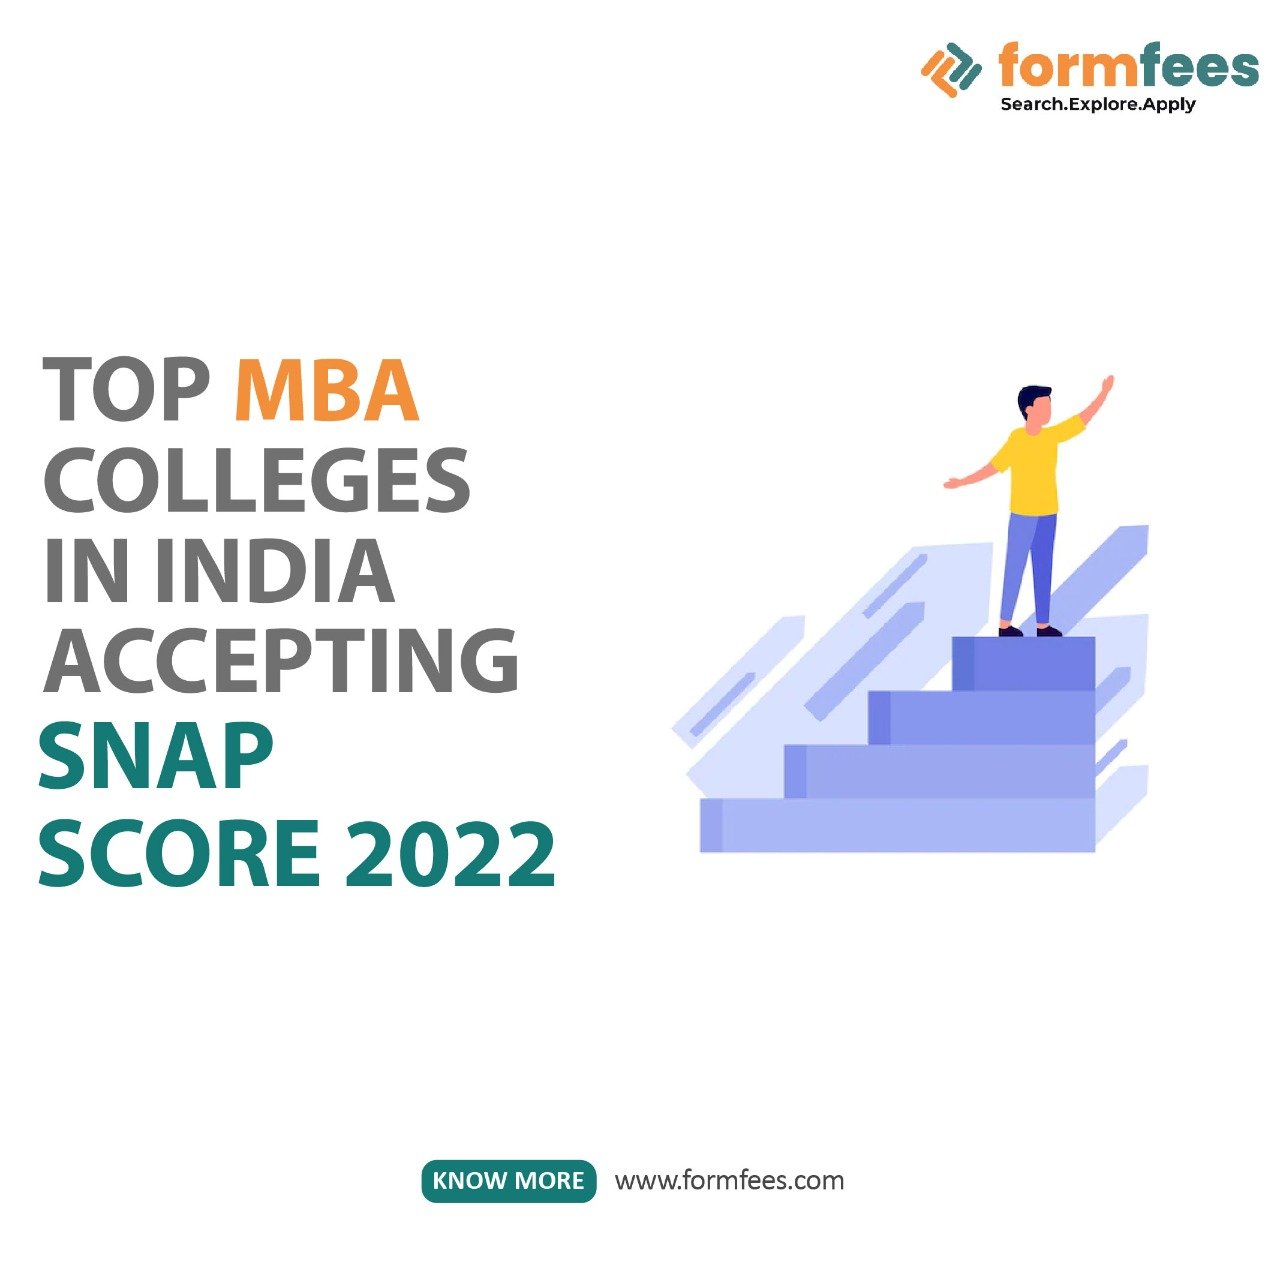 Top MBA Colleges in India Accepting SNAP Score 2022